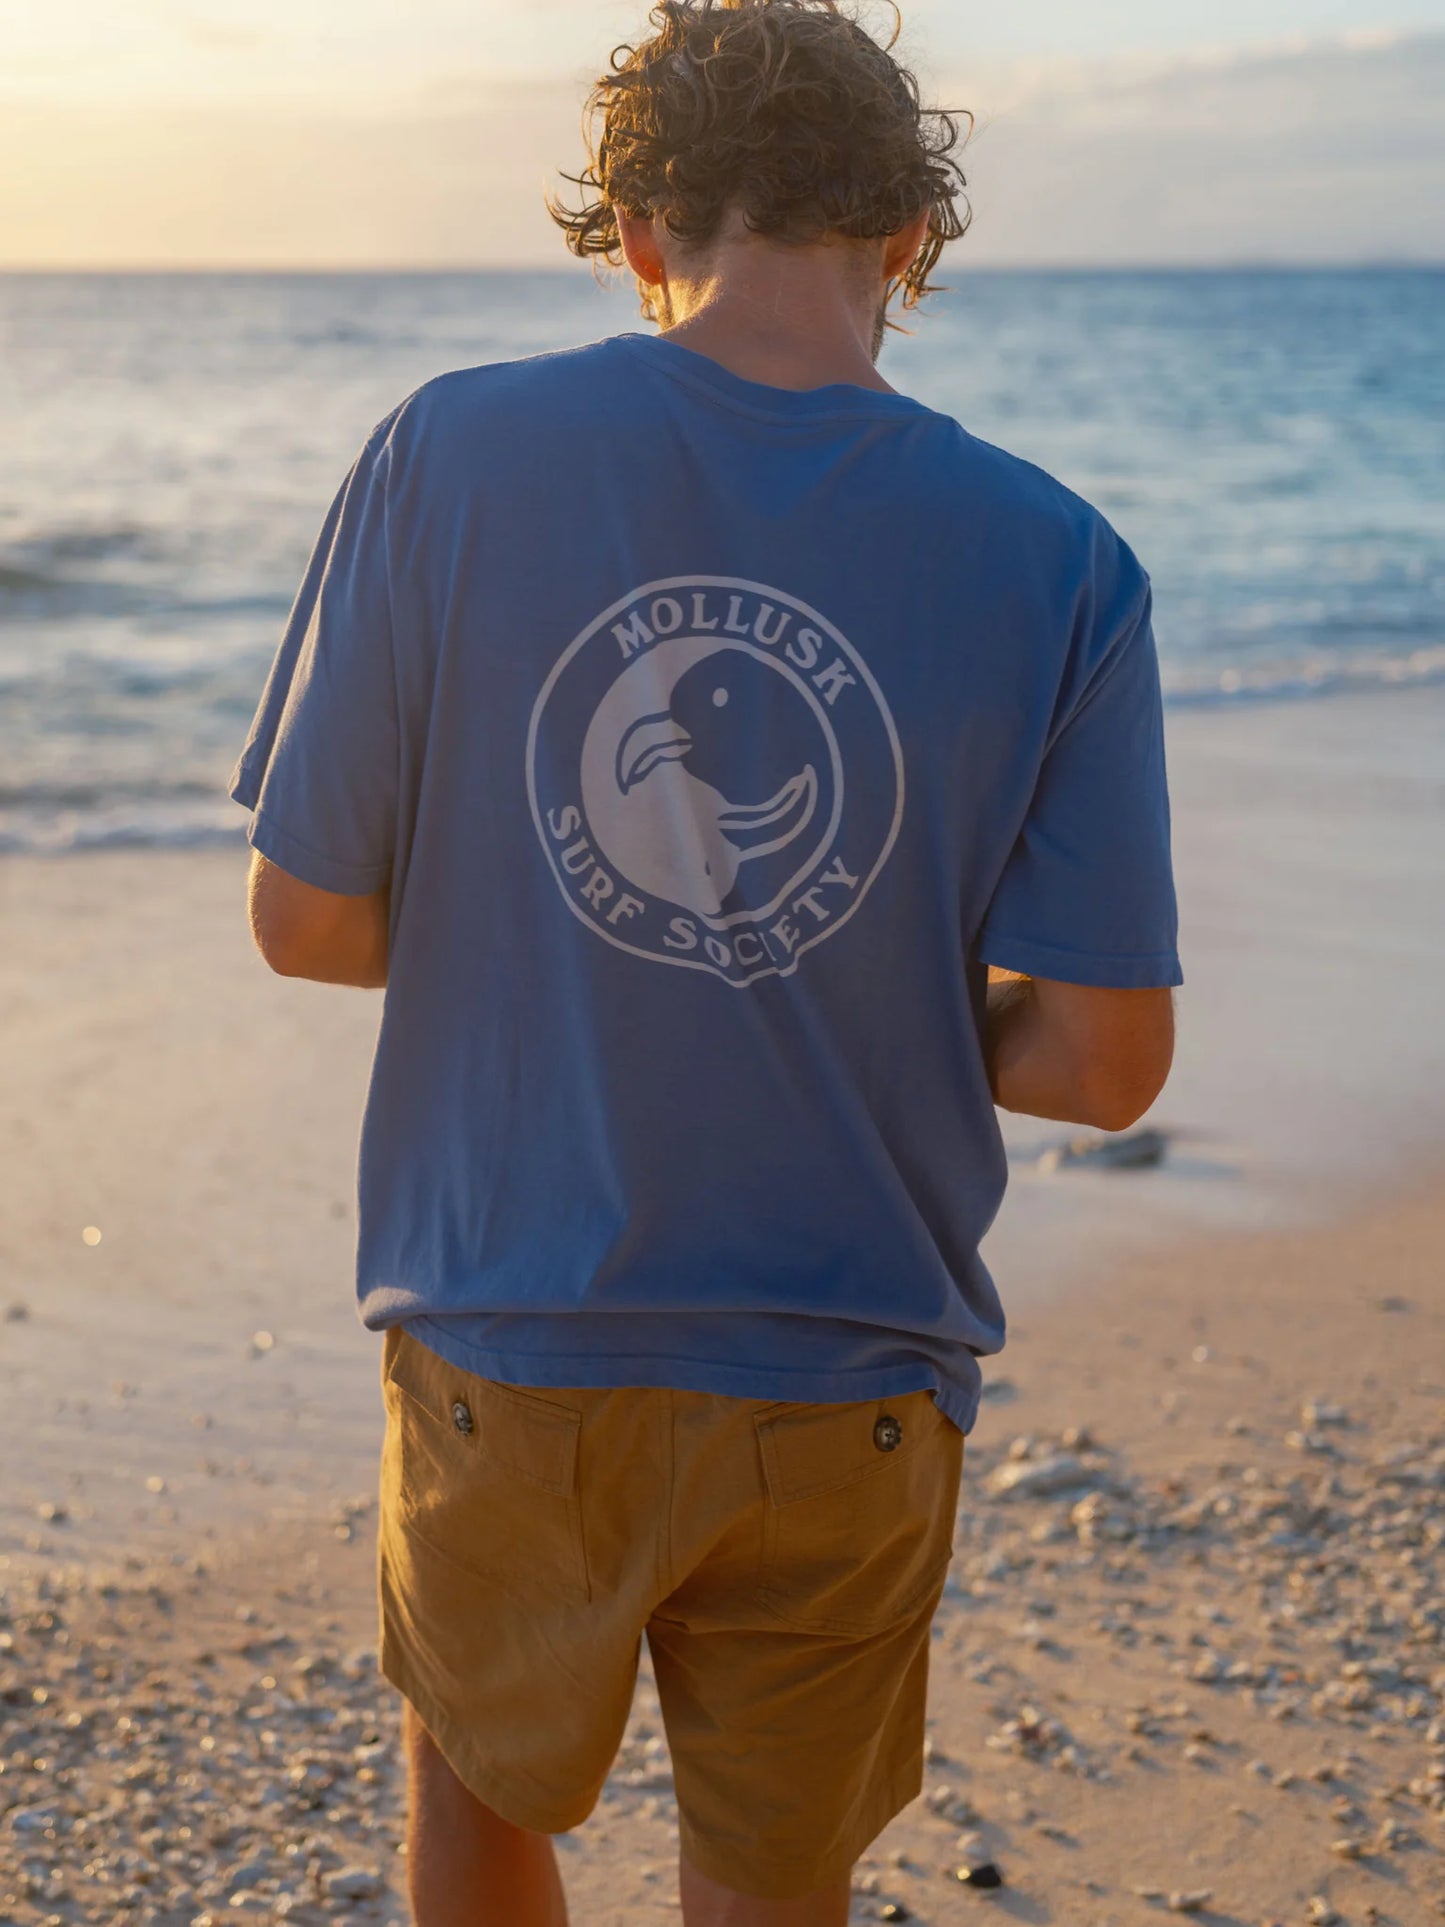 back view of the blue surf society short sleeve t-shirt by Mollusk